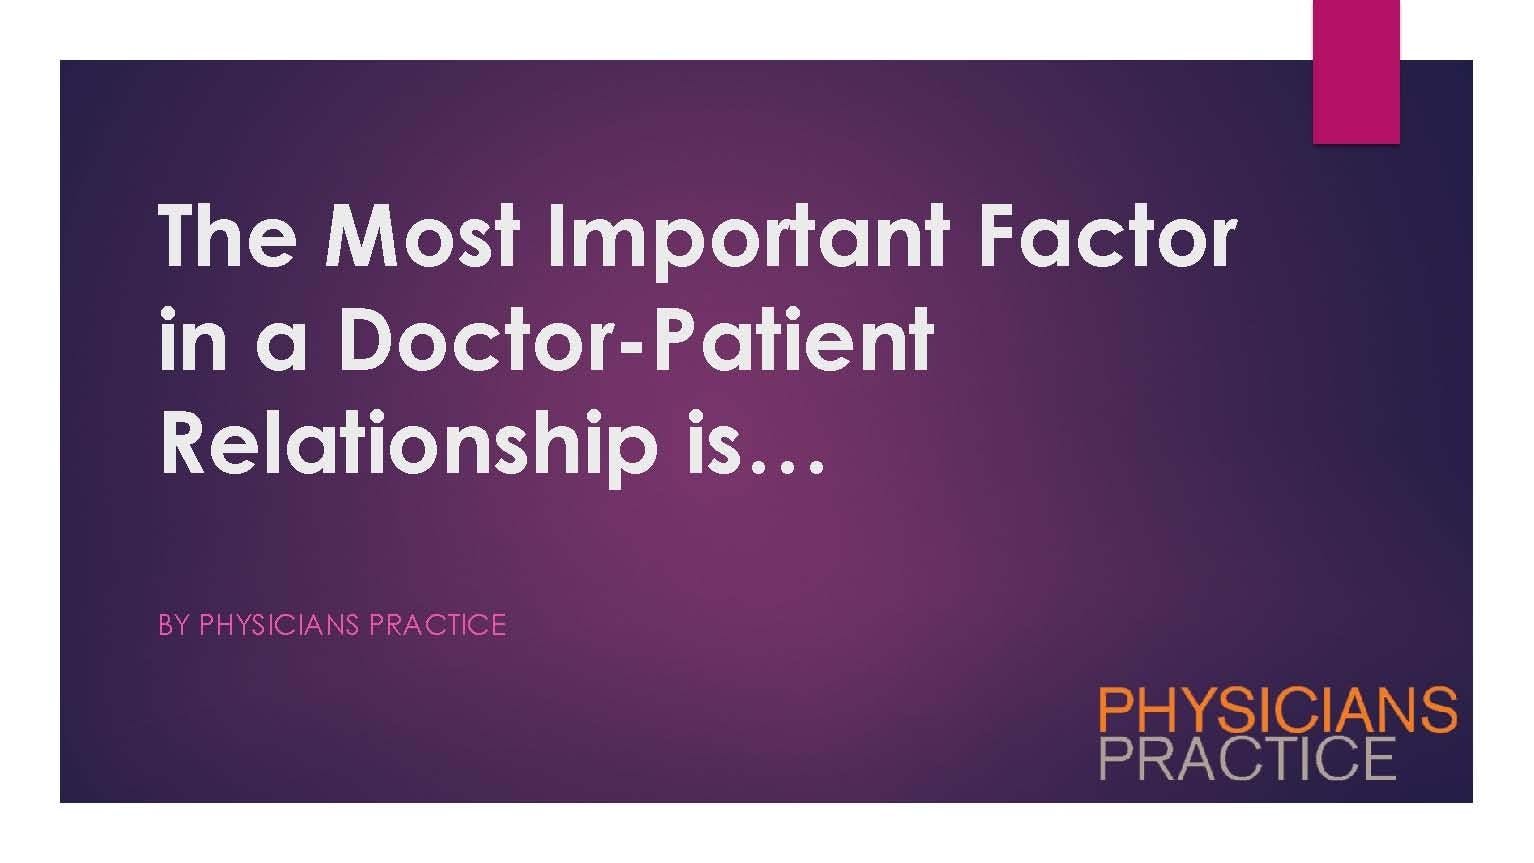 The Most Important Factor in a Doctor-Patient Relationship is…